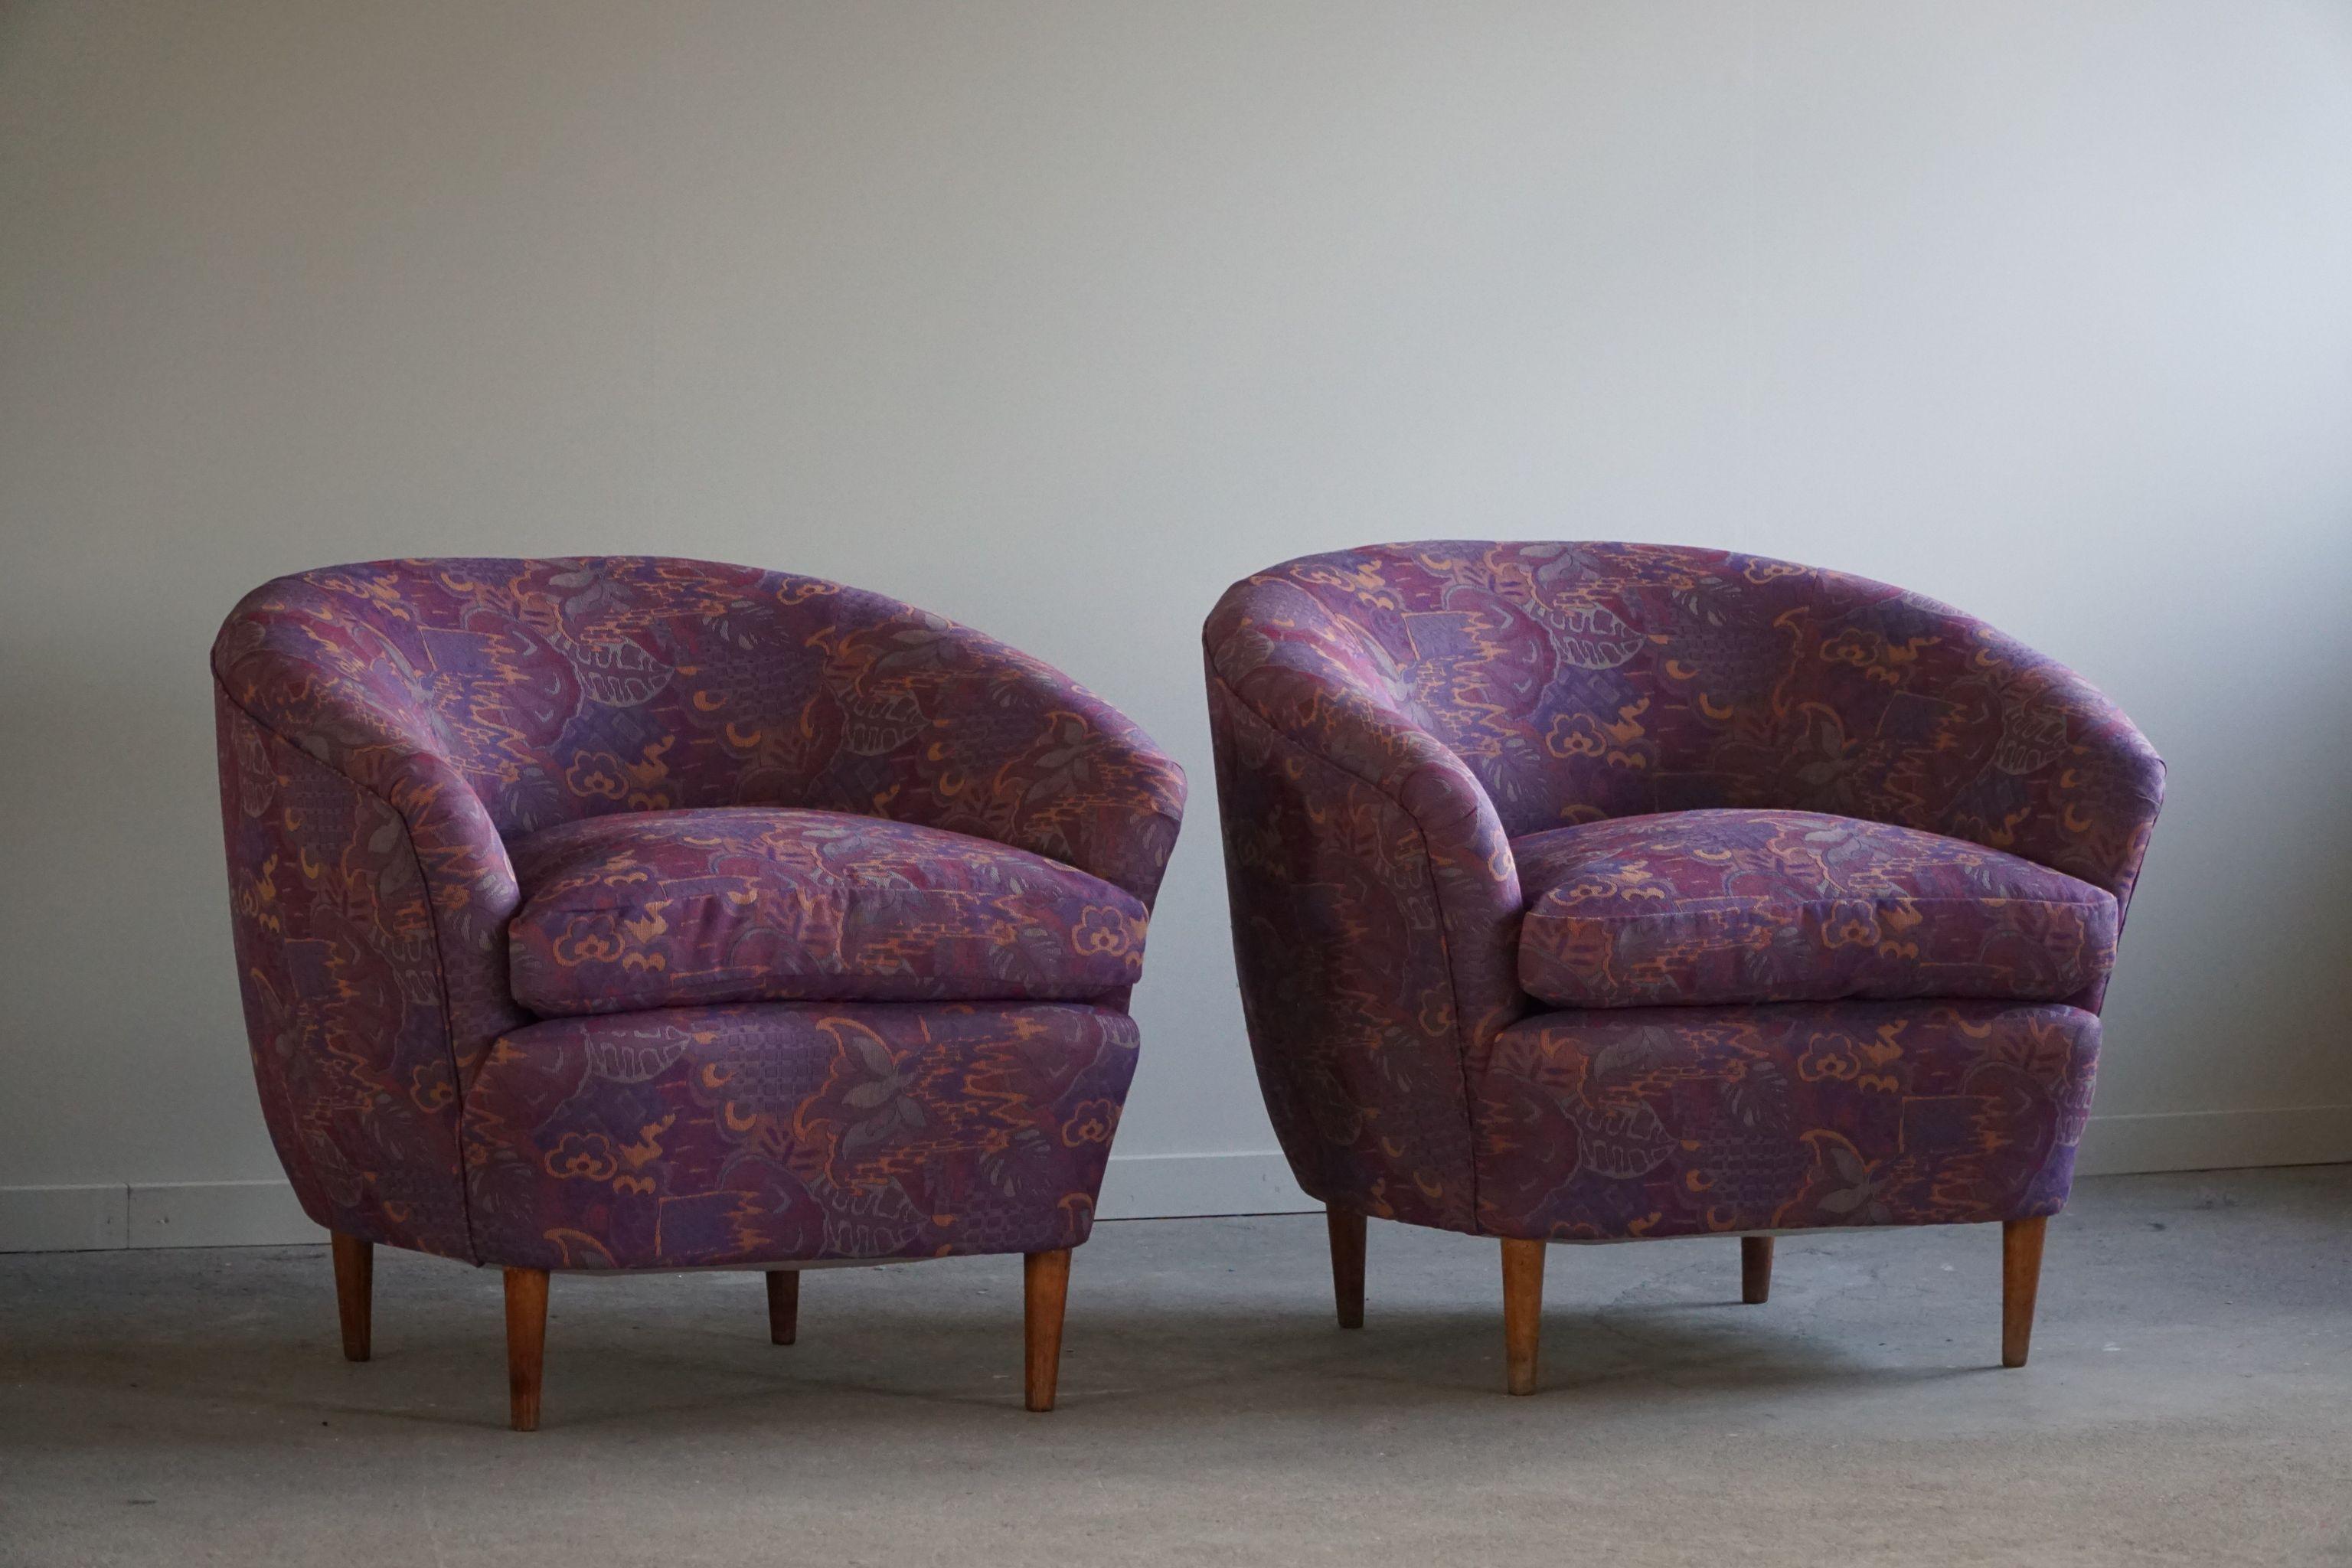 Gio Ponti, Casa E Giardino, a Pair of Lounge Chairs, Reupholstered, 1940s For Sale 5